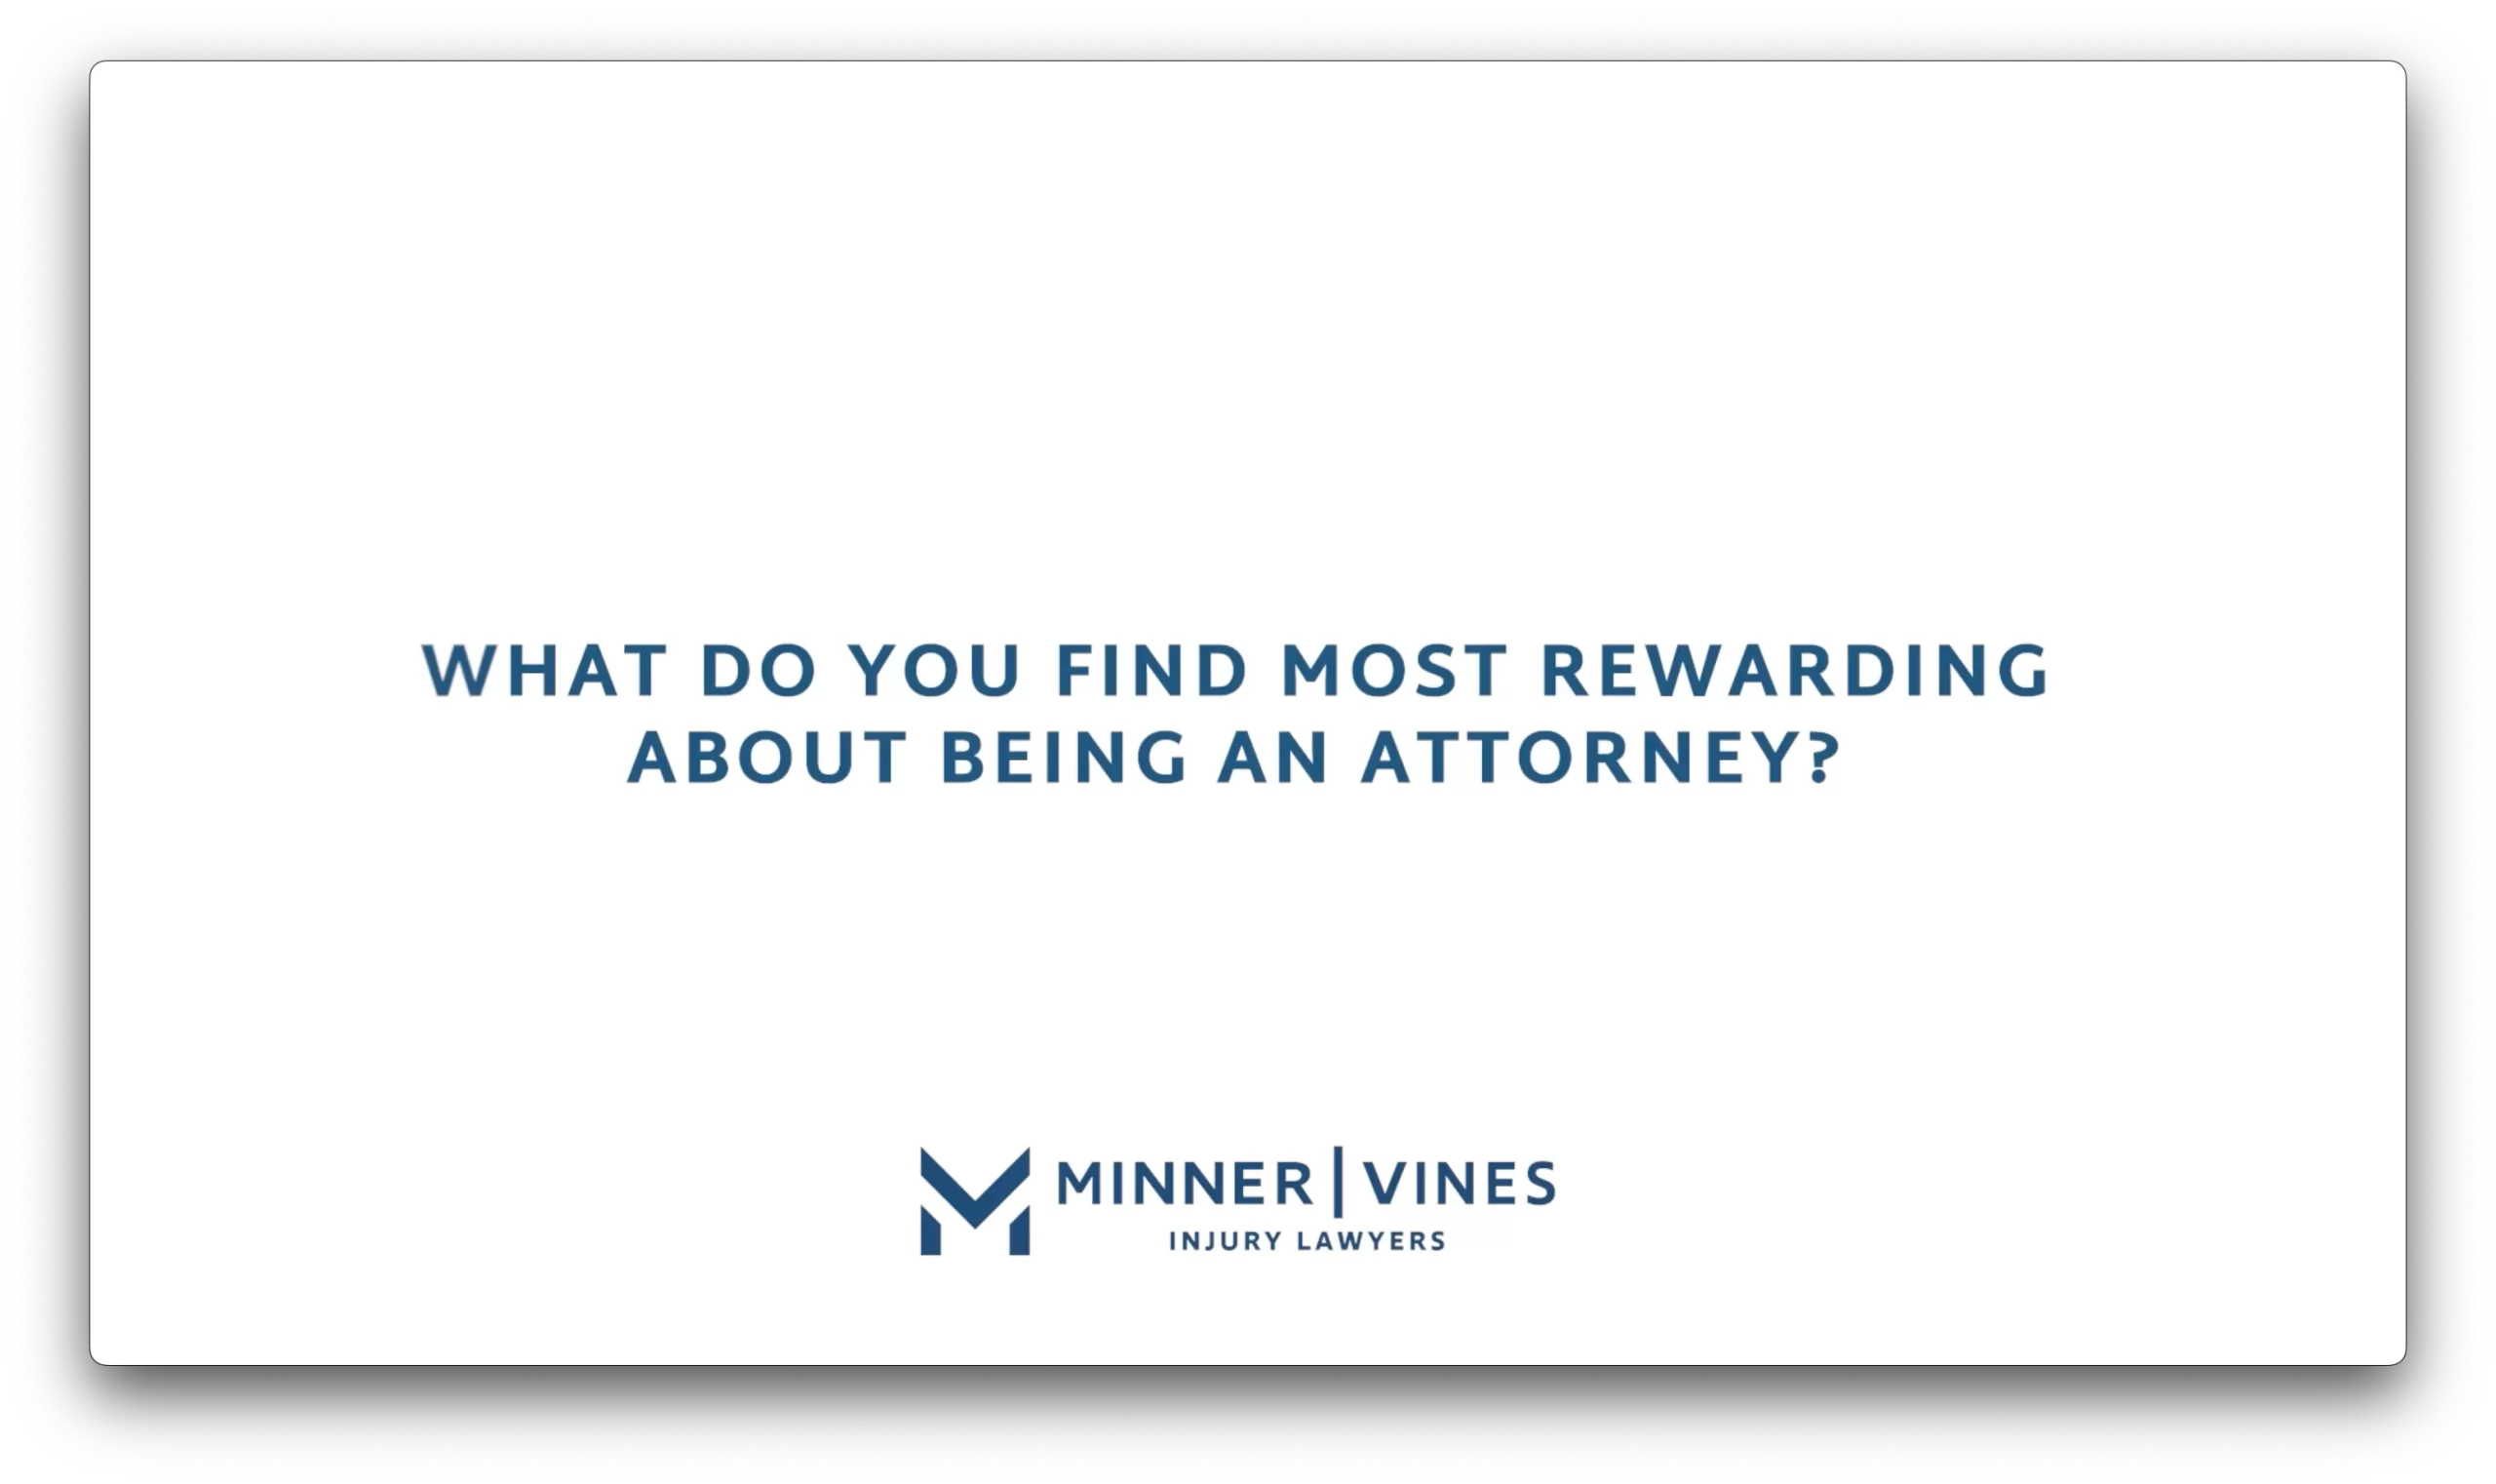 What do you find most rewarding about being an attorney?